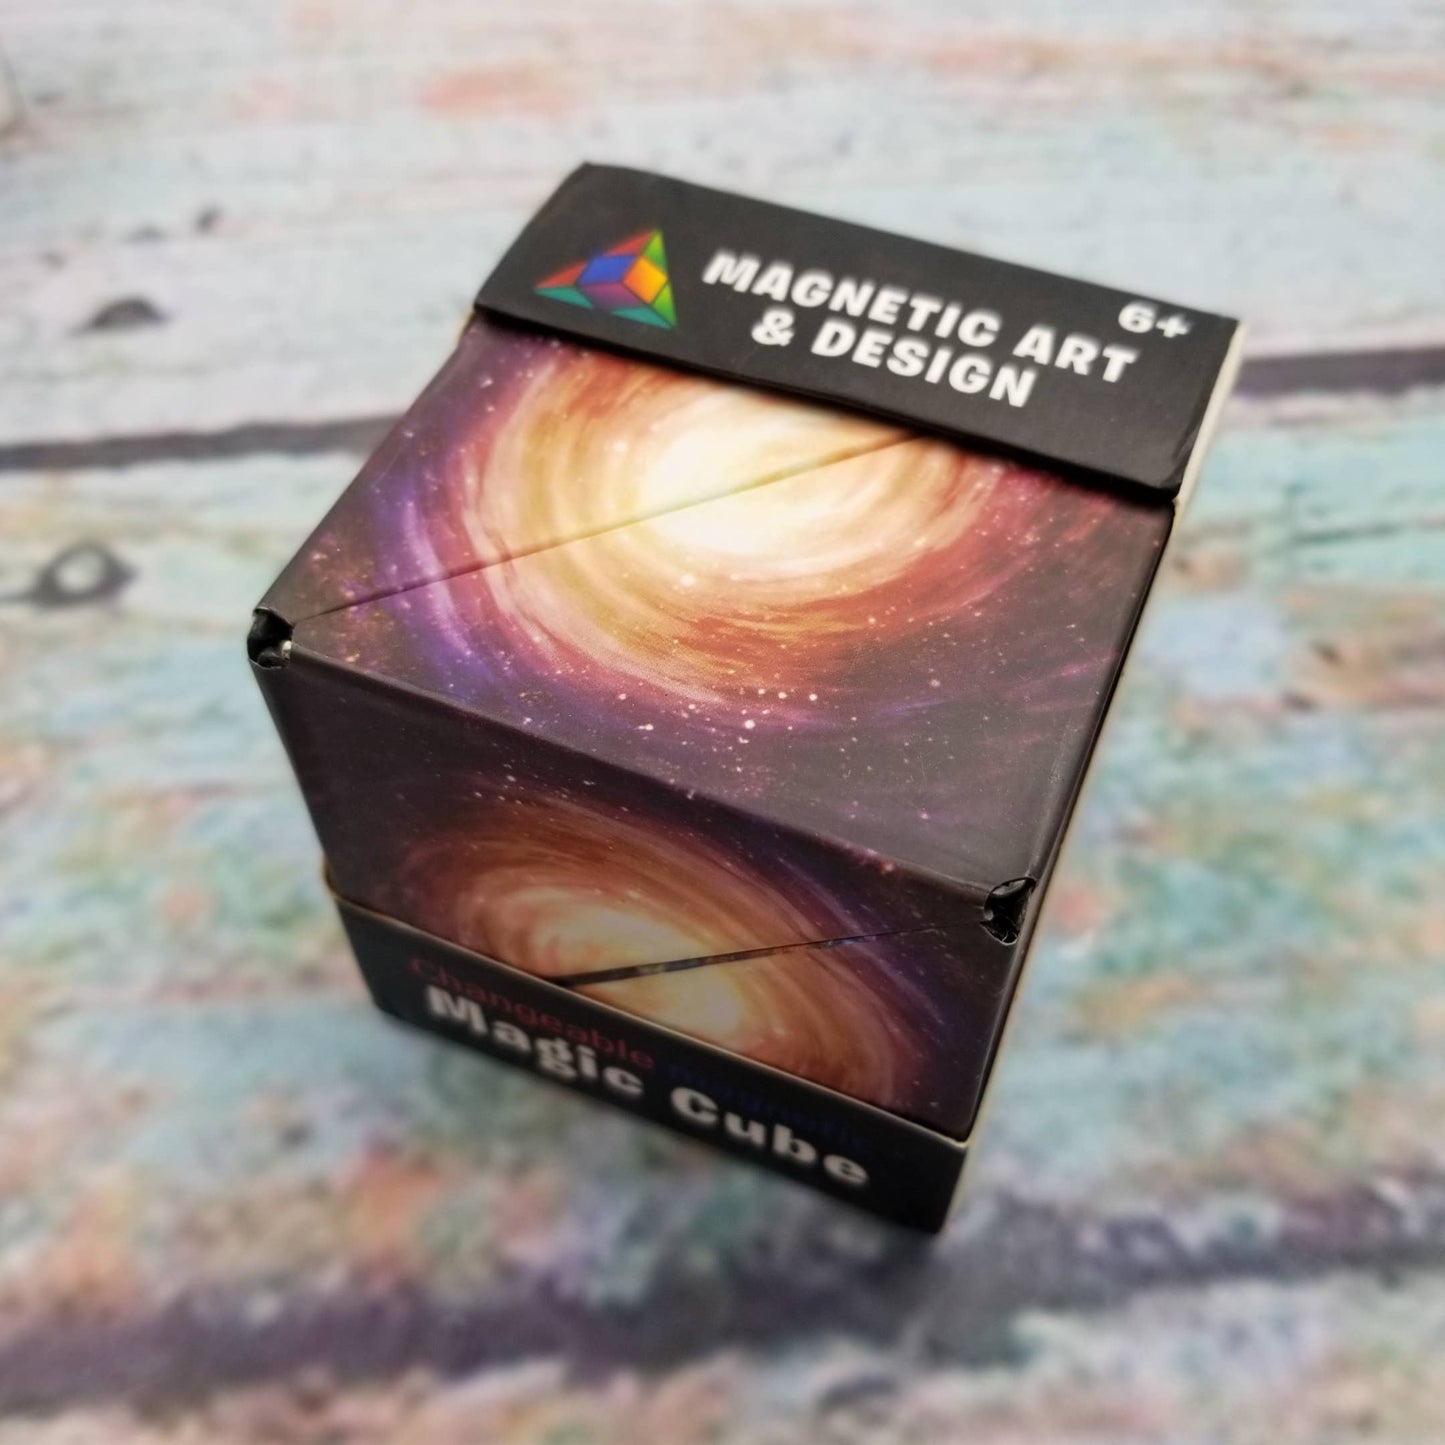 New Infinity Magnetic Cube Sensory Fidget Toy - 6 Color